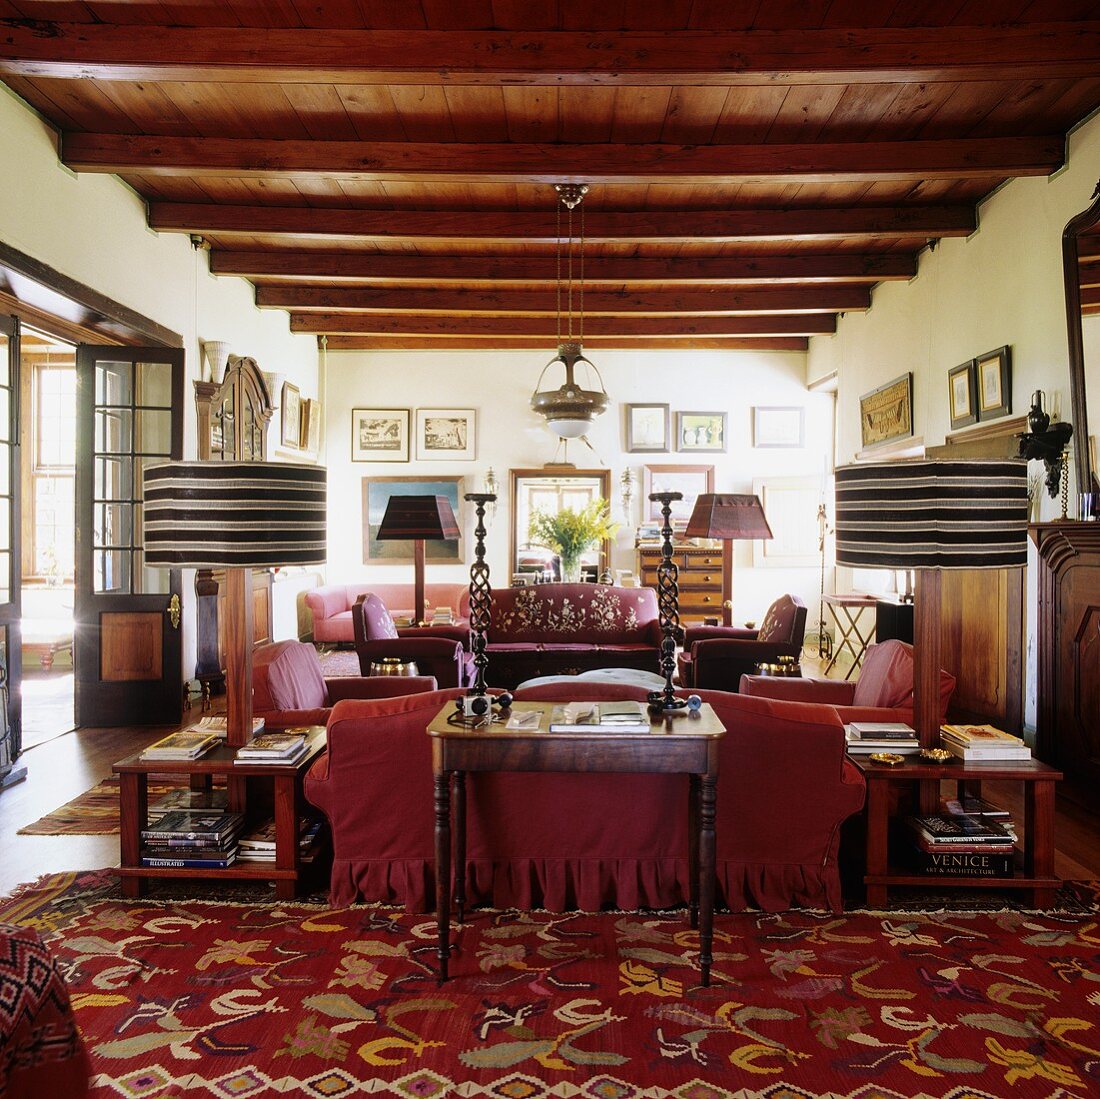 A living room with a rustic wood beam ceiling in a South African country house with a red sofa and table lamps with striped shades